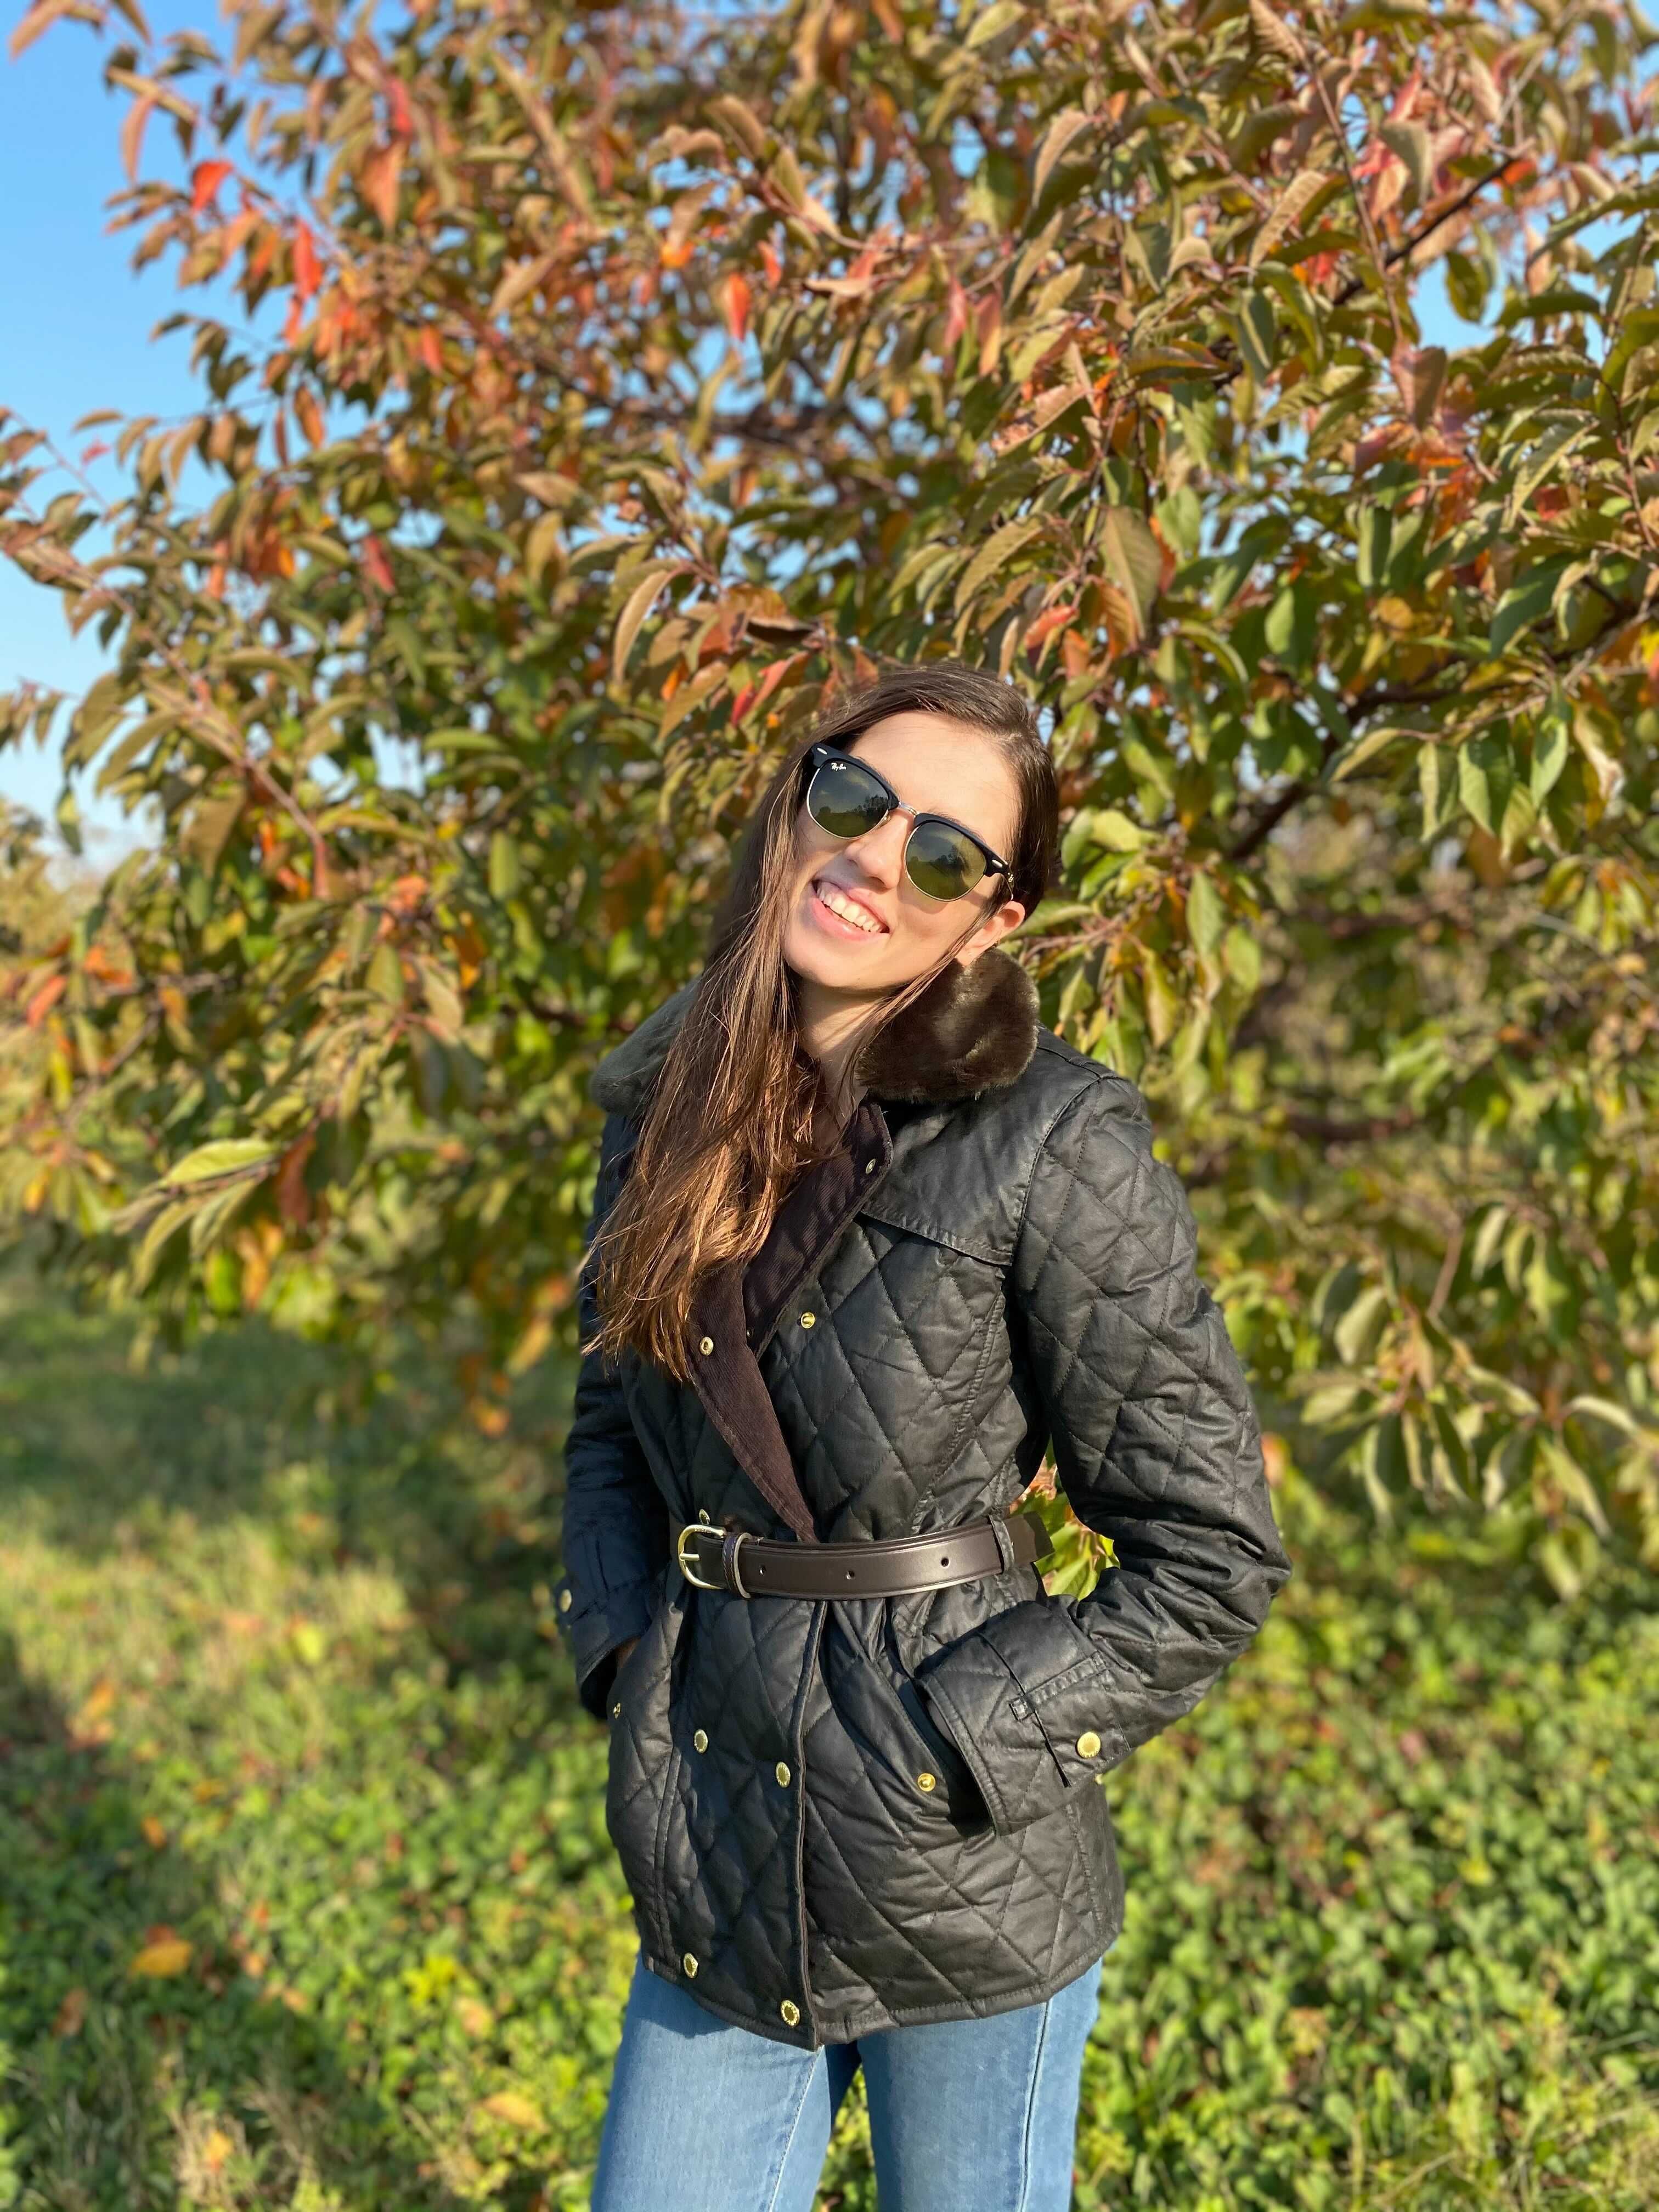 Barbour Wax Jacket Review: The Double 